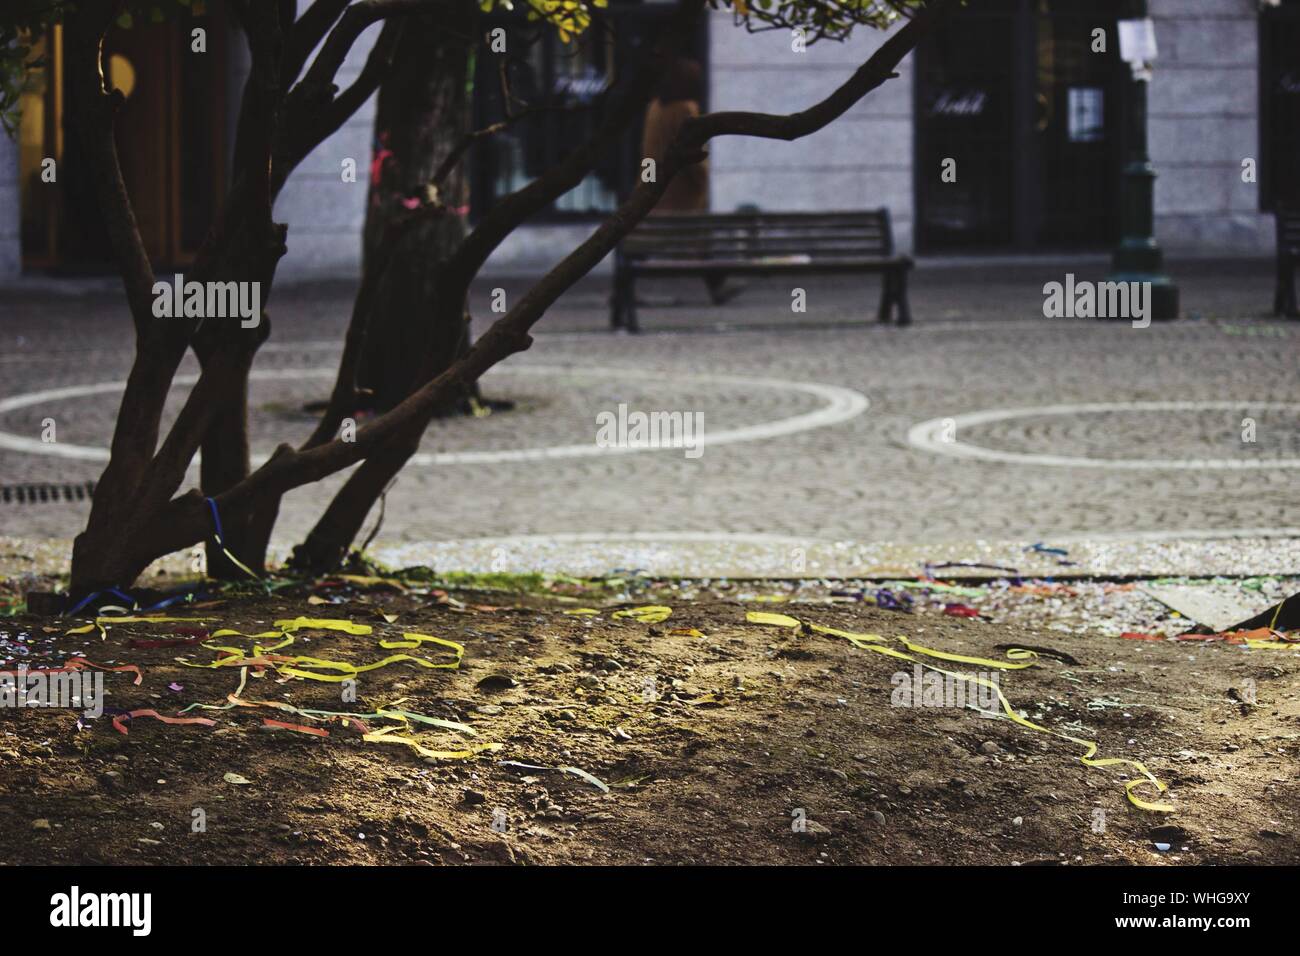 Streamers On Ground After Celebration In City Stock Photo